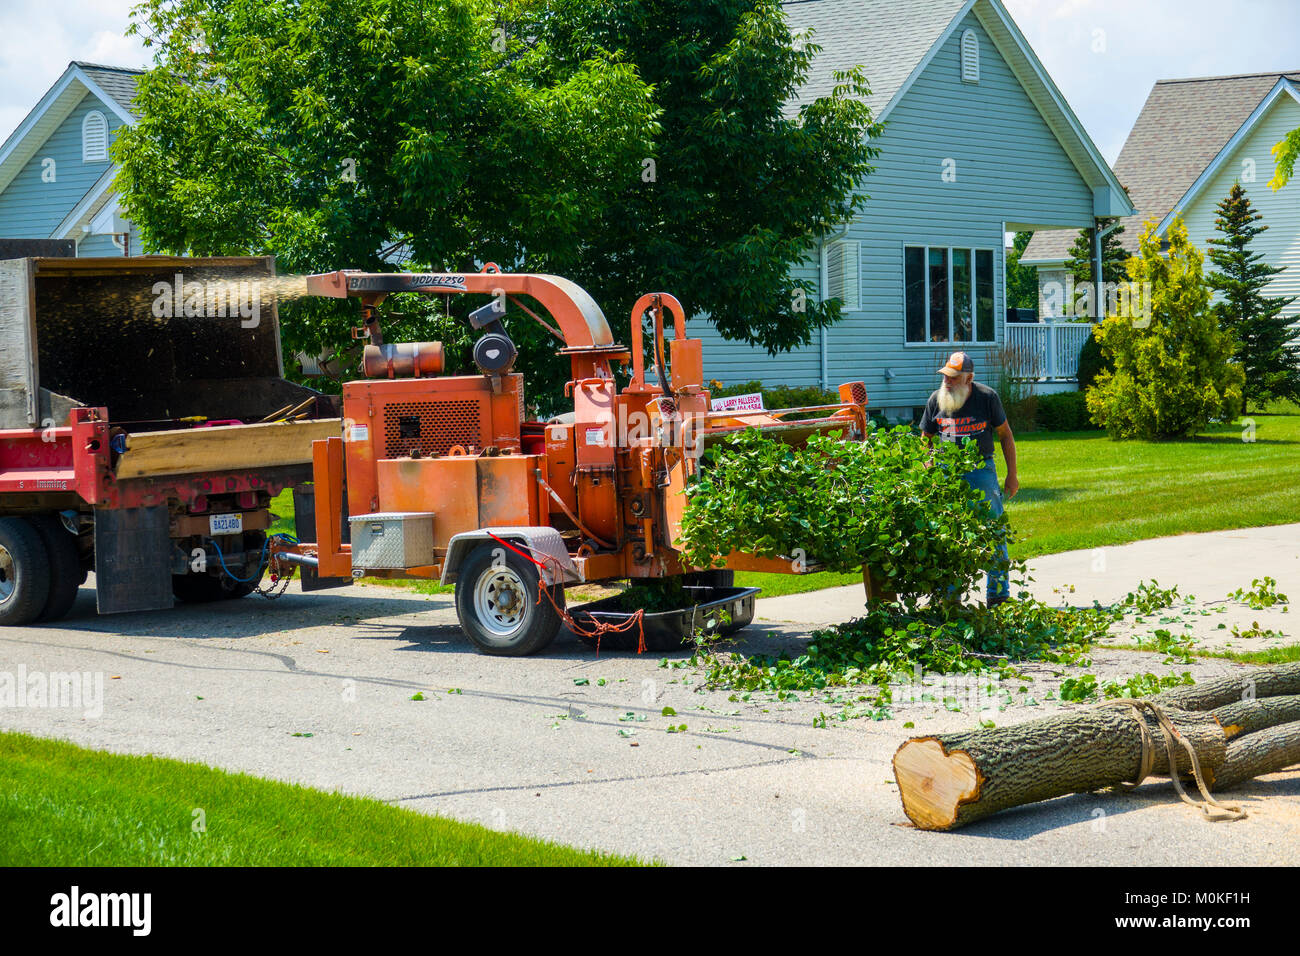 Landscaping by cutting down clearing and removing trees from a residential property Stock Photo